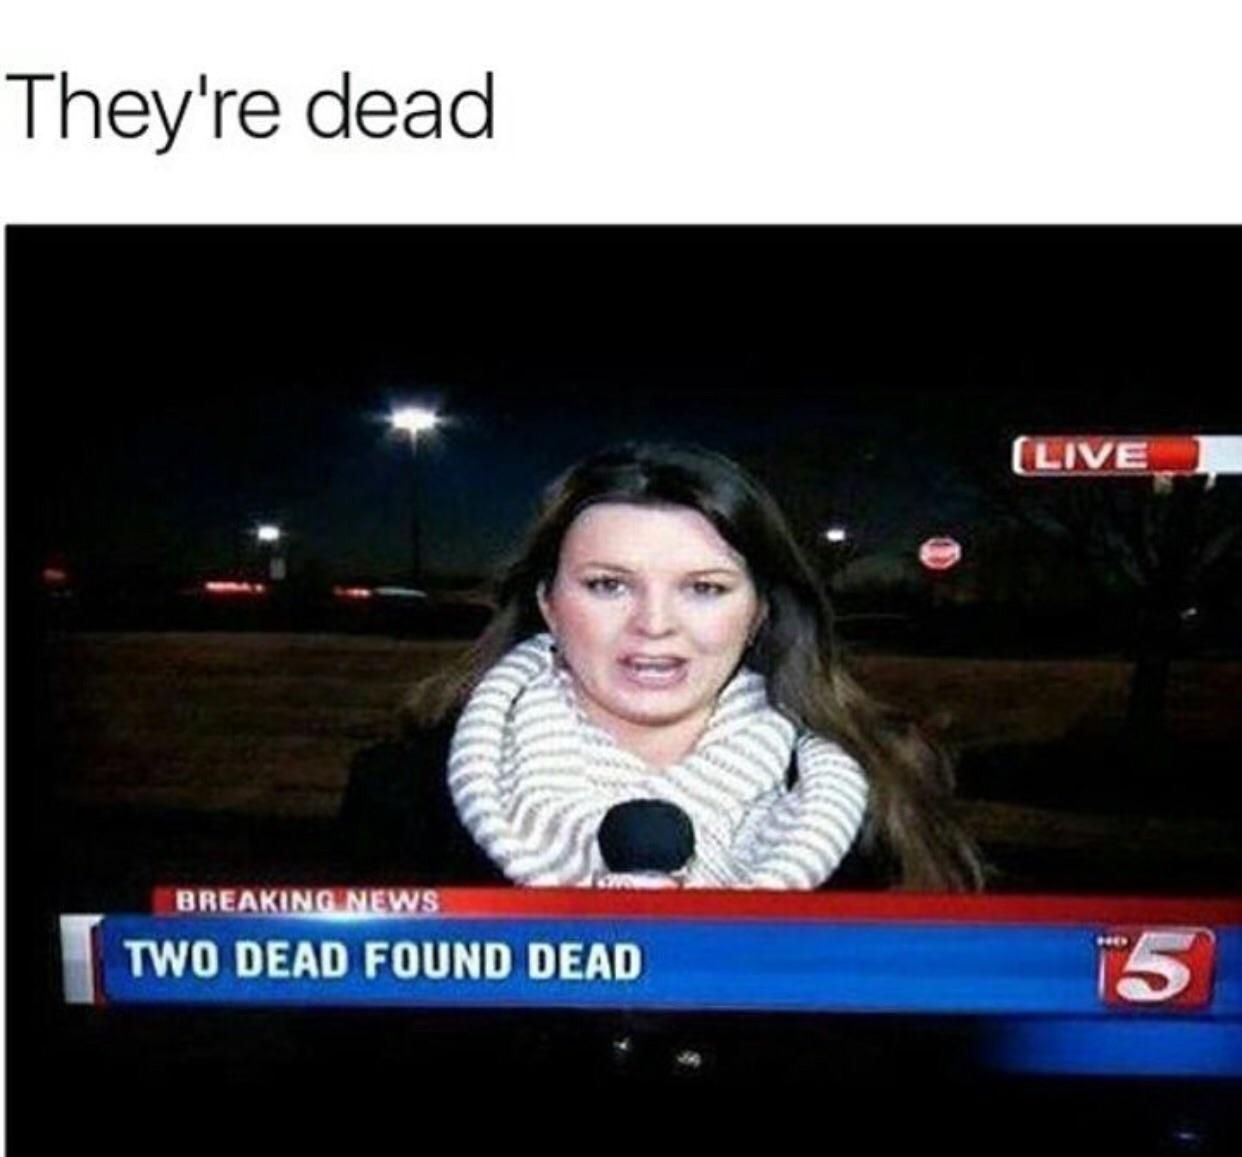 They're dead